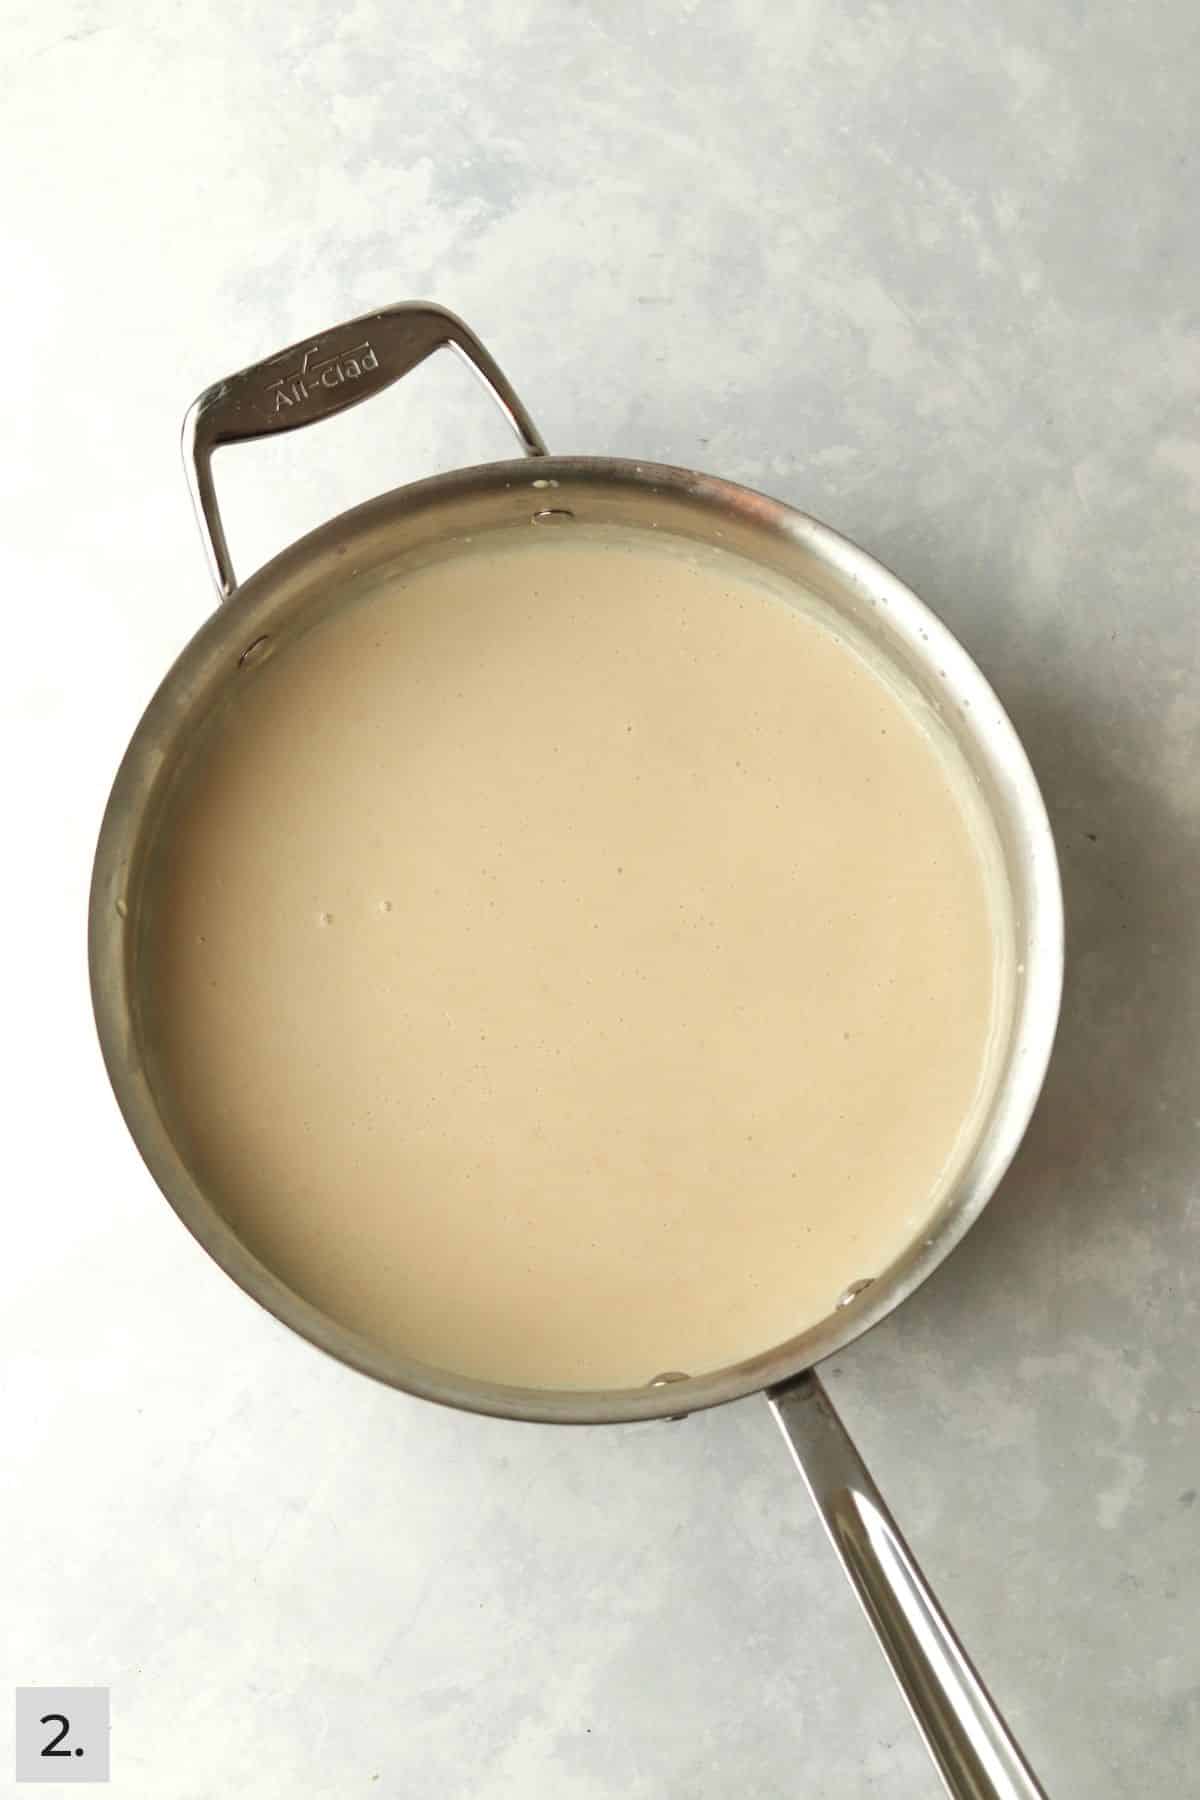 milk added to roux in sauté pan.